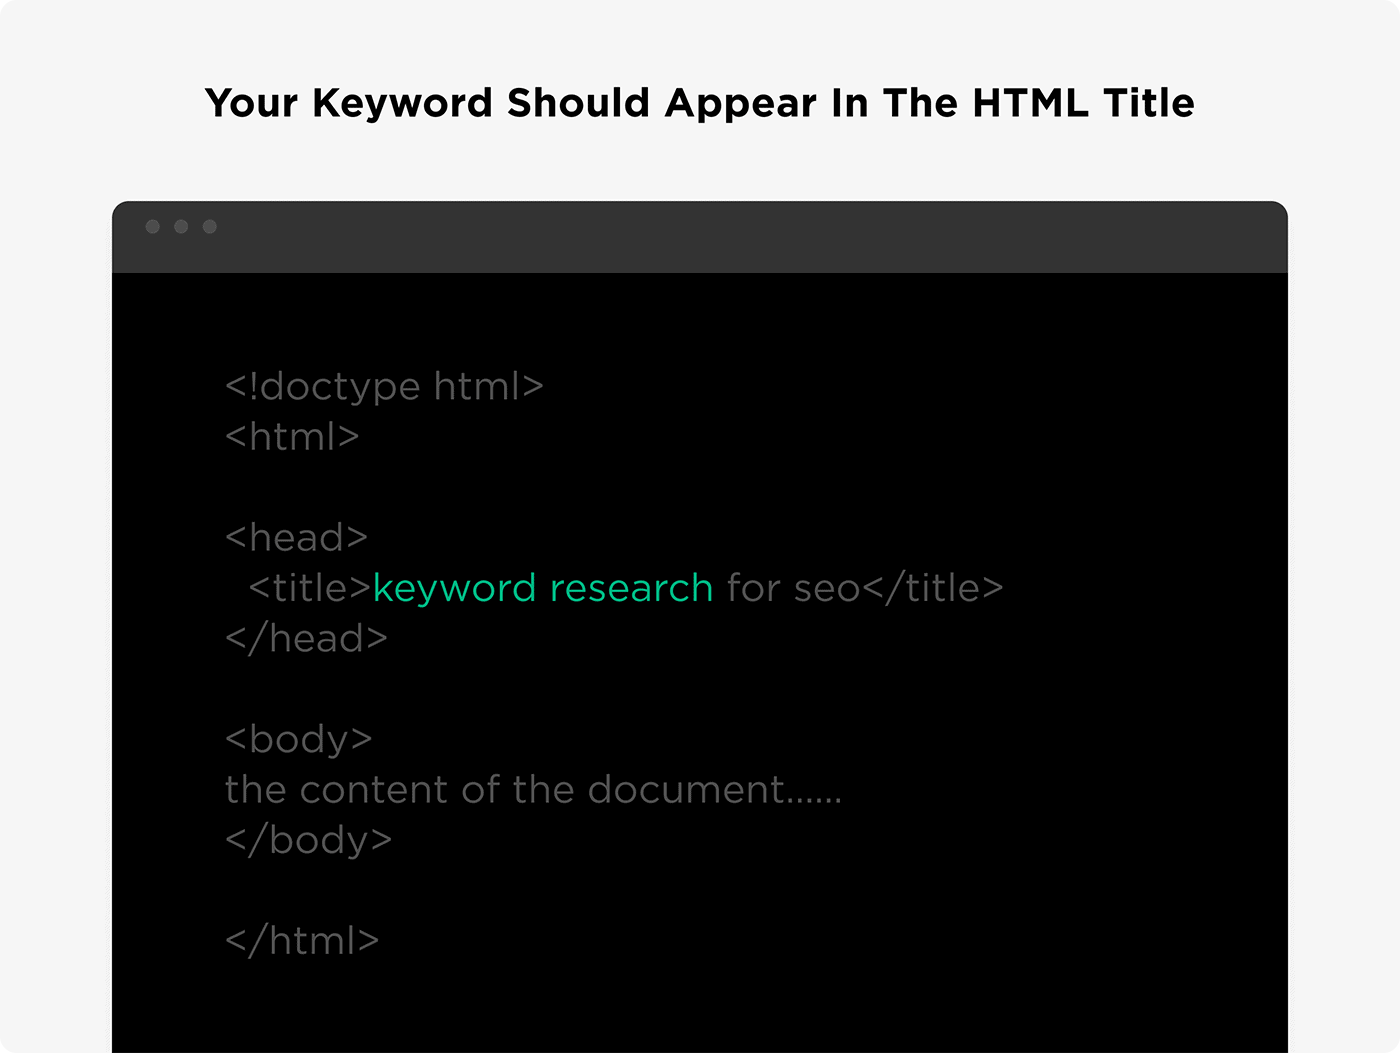 Your keyword should appear in the HTML title